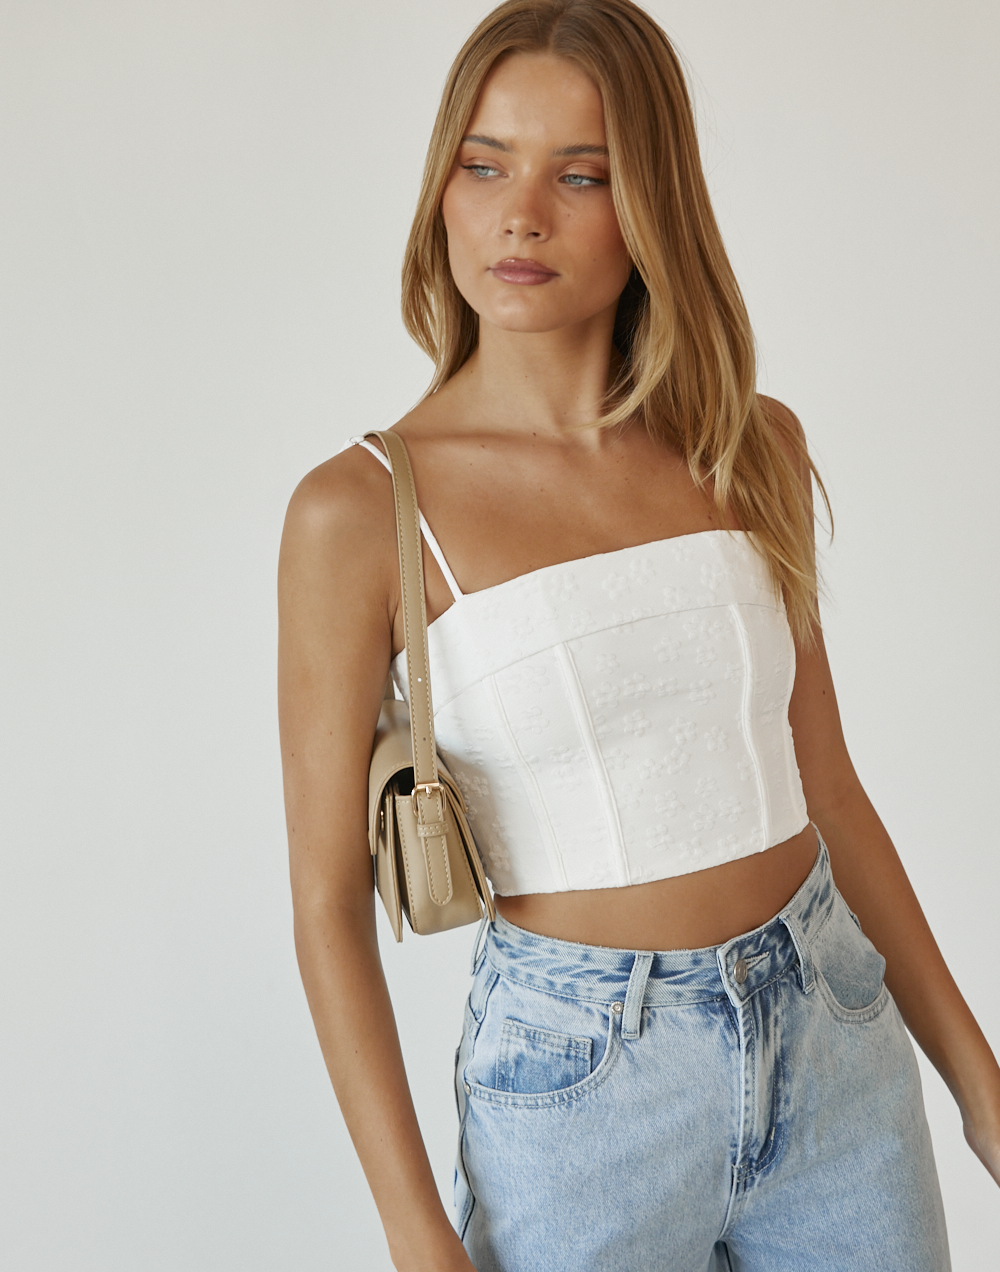 Odelle Top (White) - Corset Style Crop Top - Women's Top - Charcoal Clothing